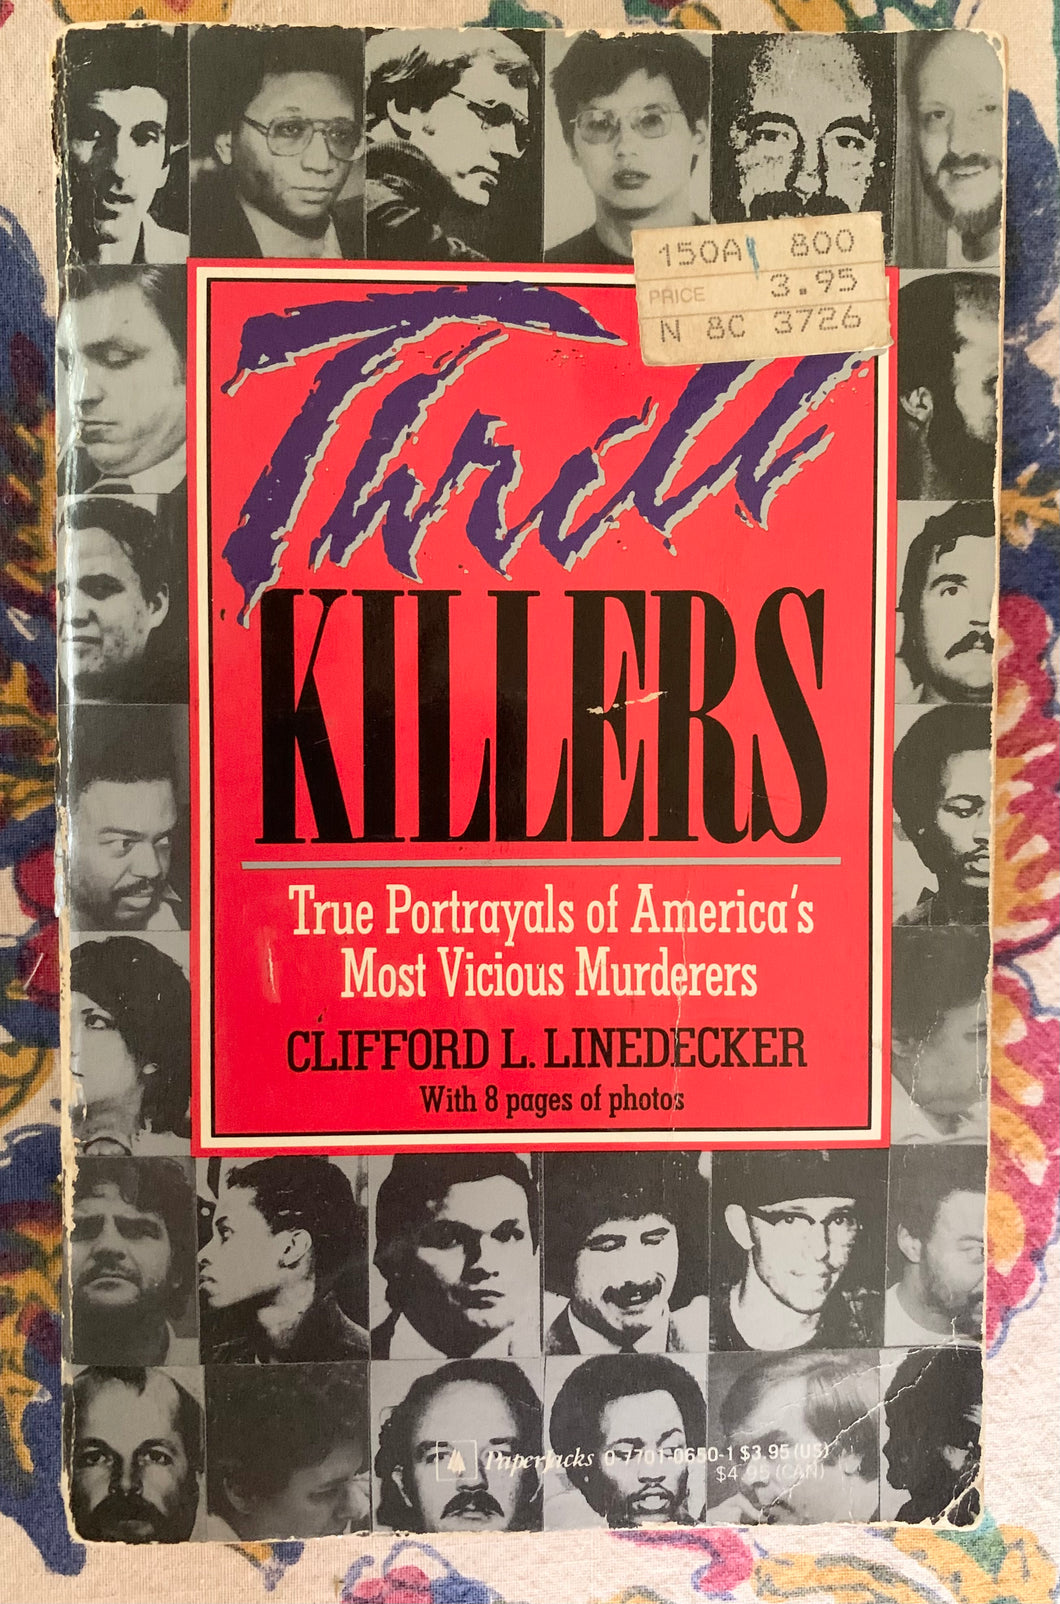 Thrill Killers: True Portrayals of America's Most Vicious Murderers